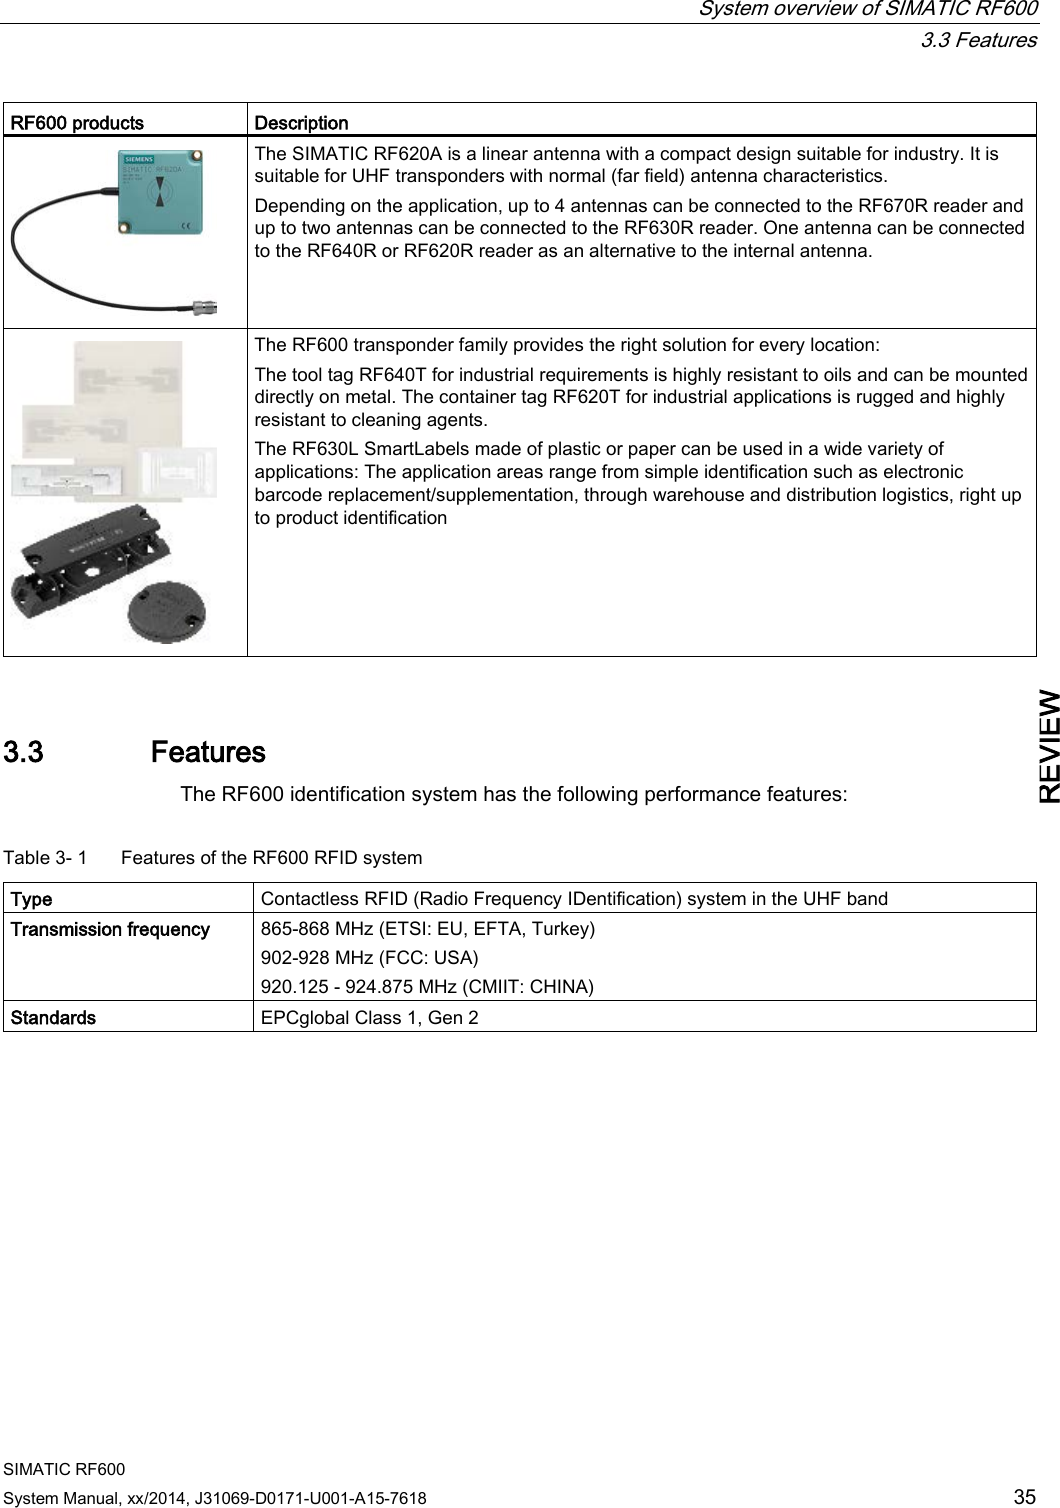  System overview of SIMATIC RF600  3.3 Features SIMATIC RF600 System Manual, xx/2014, J31069-D0171-U001-A15-7618 35 REVIEW RF600 products Description  The SIMATIC RF620A is a linear antenna with a compact design suitable for industry. It is suitable for UHF transponders with normal (far field) antenna characteristics. Depending on the application, up to 4 antennas can be connected to the RF670R reader and up to two antennas can be connected to the RF630R reader. One antenna can be connected to the RF640R or RF620R reader as an alternative to the internal antenna.  The RF600 transponder family provides the right solution for every location: The tool tag RF640T for industrial requirements is highly resistant to oils and can be mounted directly on metal. The container tag RF620T for industrial applications is rugged and highly resistant to cleaning agents. The RF630L SmartLabels made of plastic or paper can be used in a wide variety of applications: The application areas range from simple identification such as electronic barcode replacement/supplementation, through warehouse and distribution logistics, right up to product identification 3.3 Features The RF600 identification system has the following performance features:  Table 3- 1  Features of the RF600 RFID system Type Contactless RFID (Radio Frequency IDentification) system in the UHF band Transmission frequency 865-868 MHz (ETSI: EU, EFTA, Turkey) 902-928 MHz (FCC: USA) 920.125 - 924.875 MHz (CMIIT: CHINA) Standards EPCglobal Class 1, Gen 2  